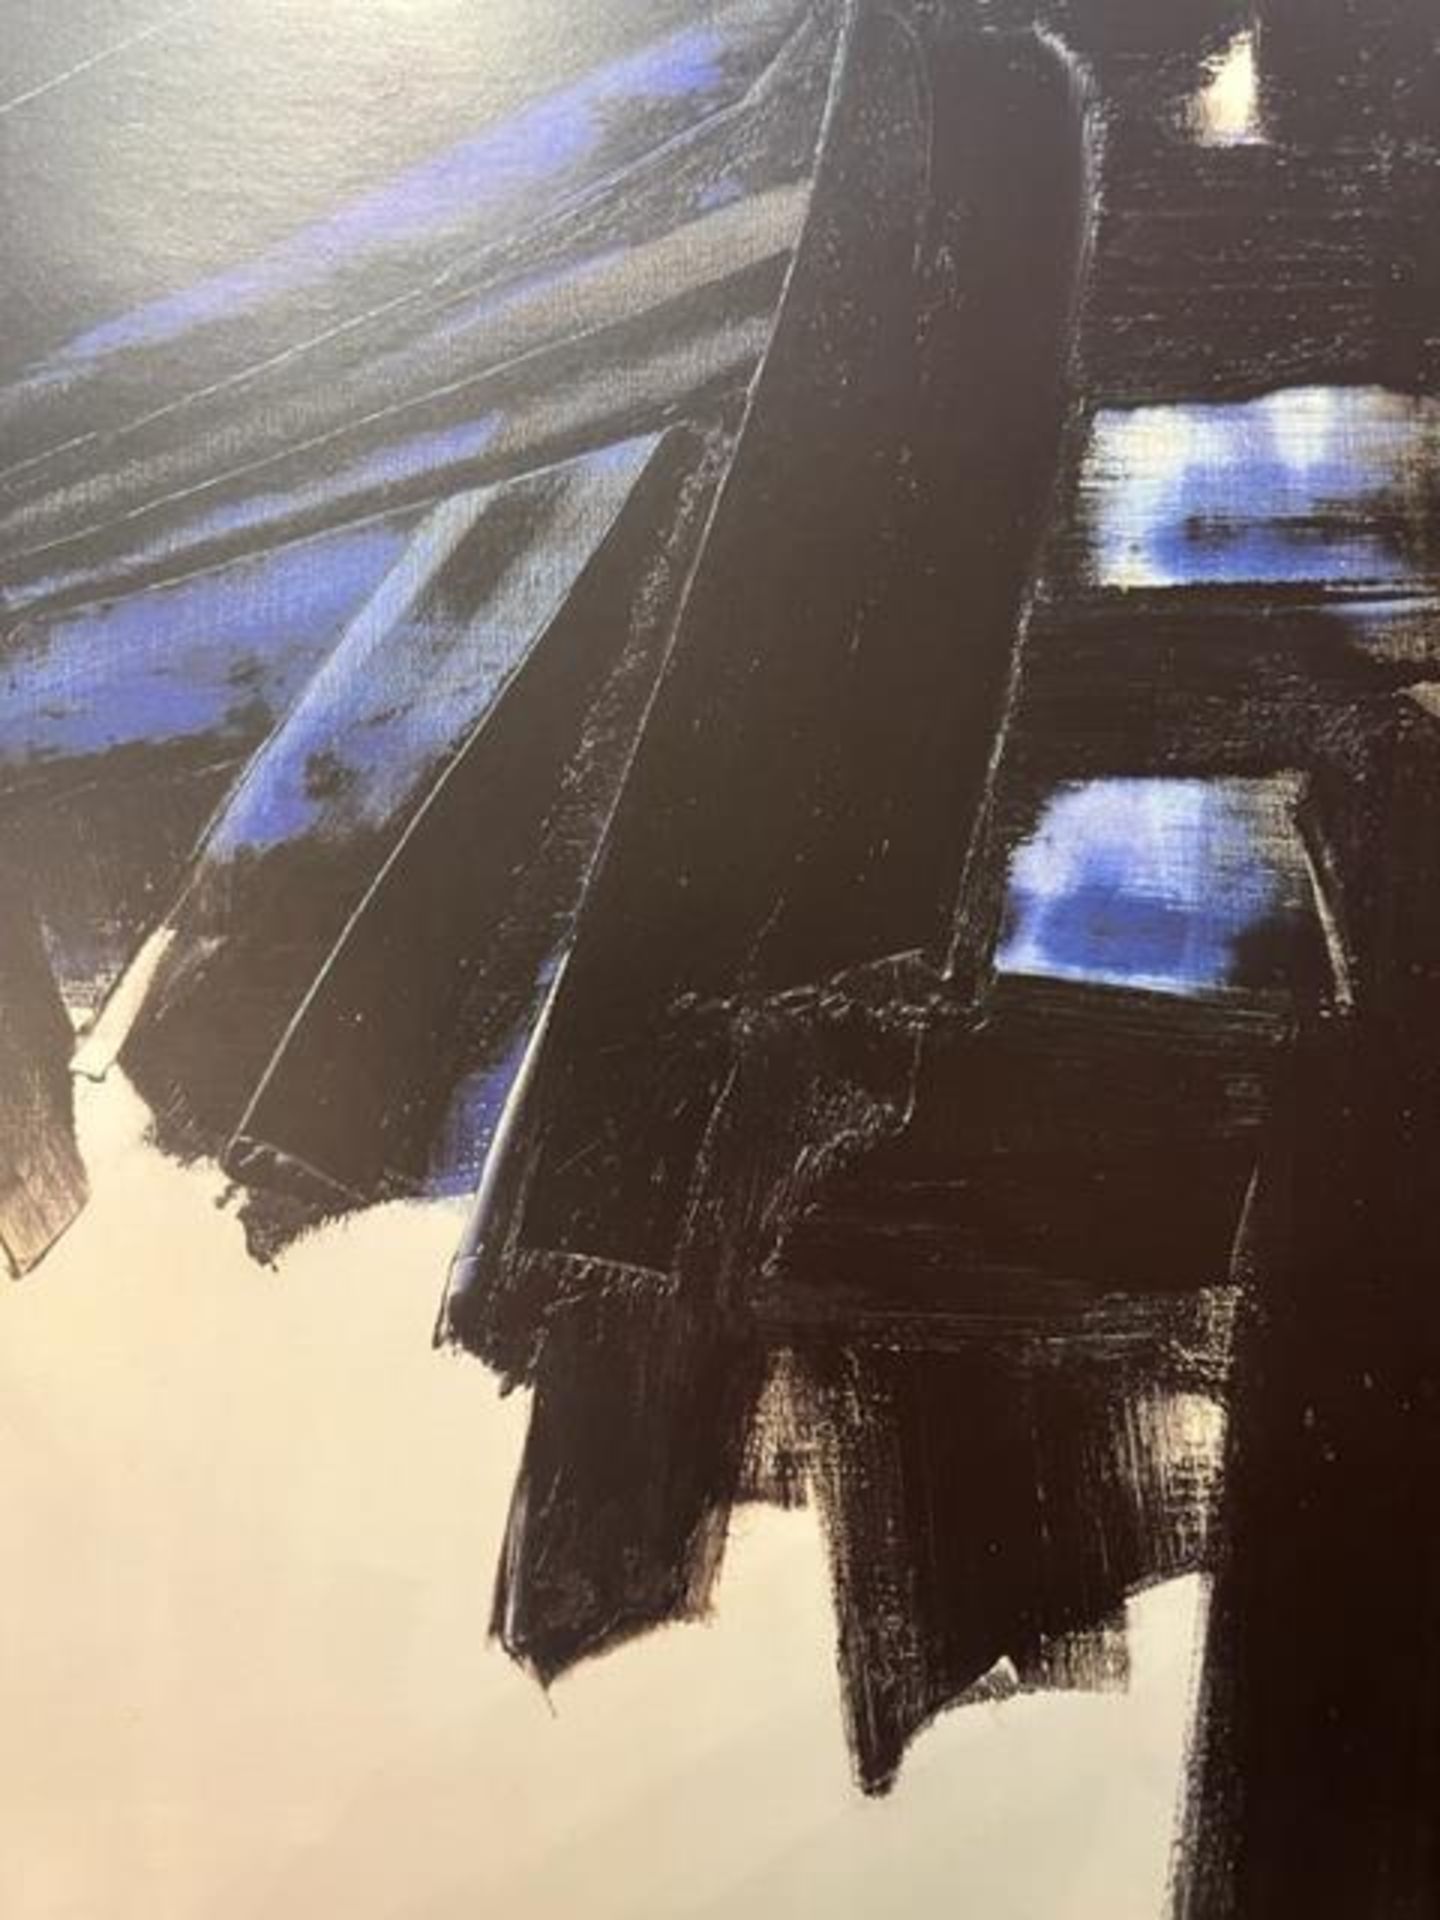 Pierre Soulages "Untitled" Print. - Image 5 of 6